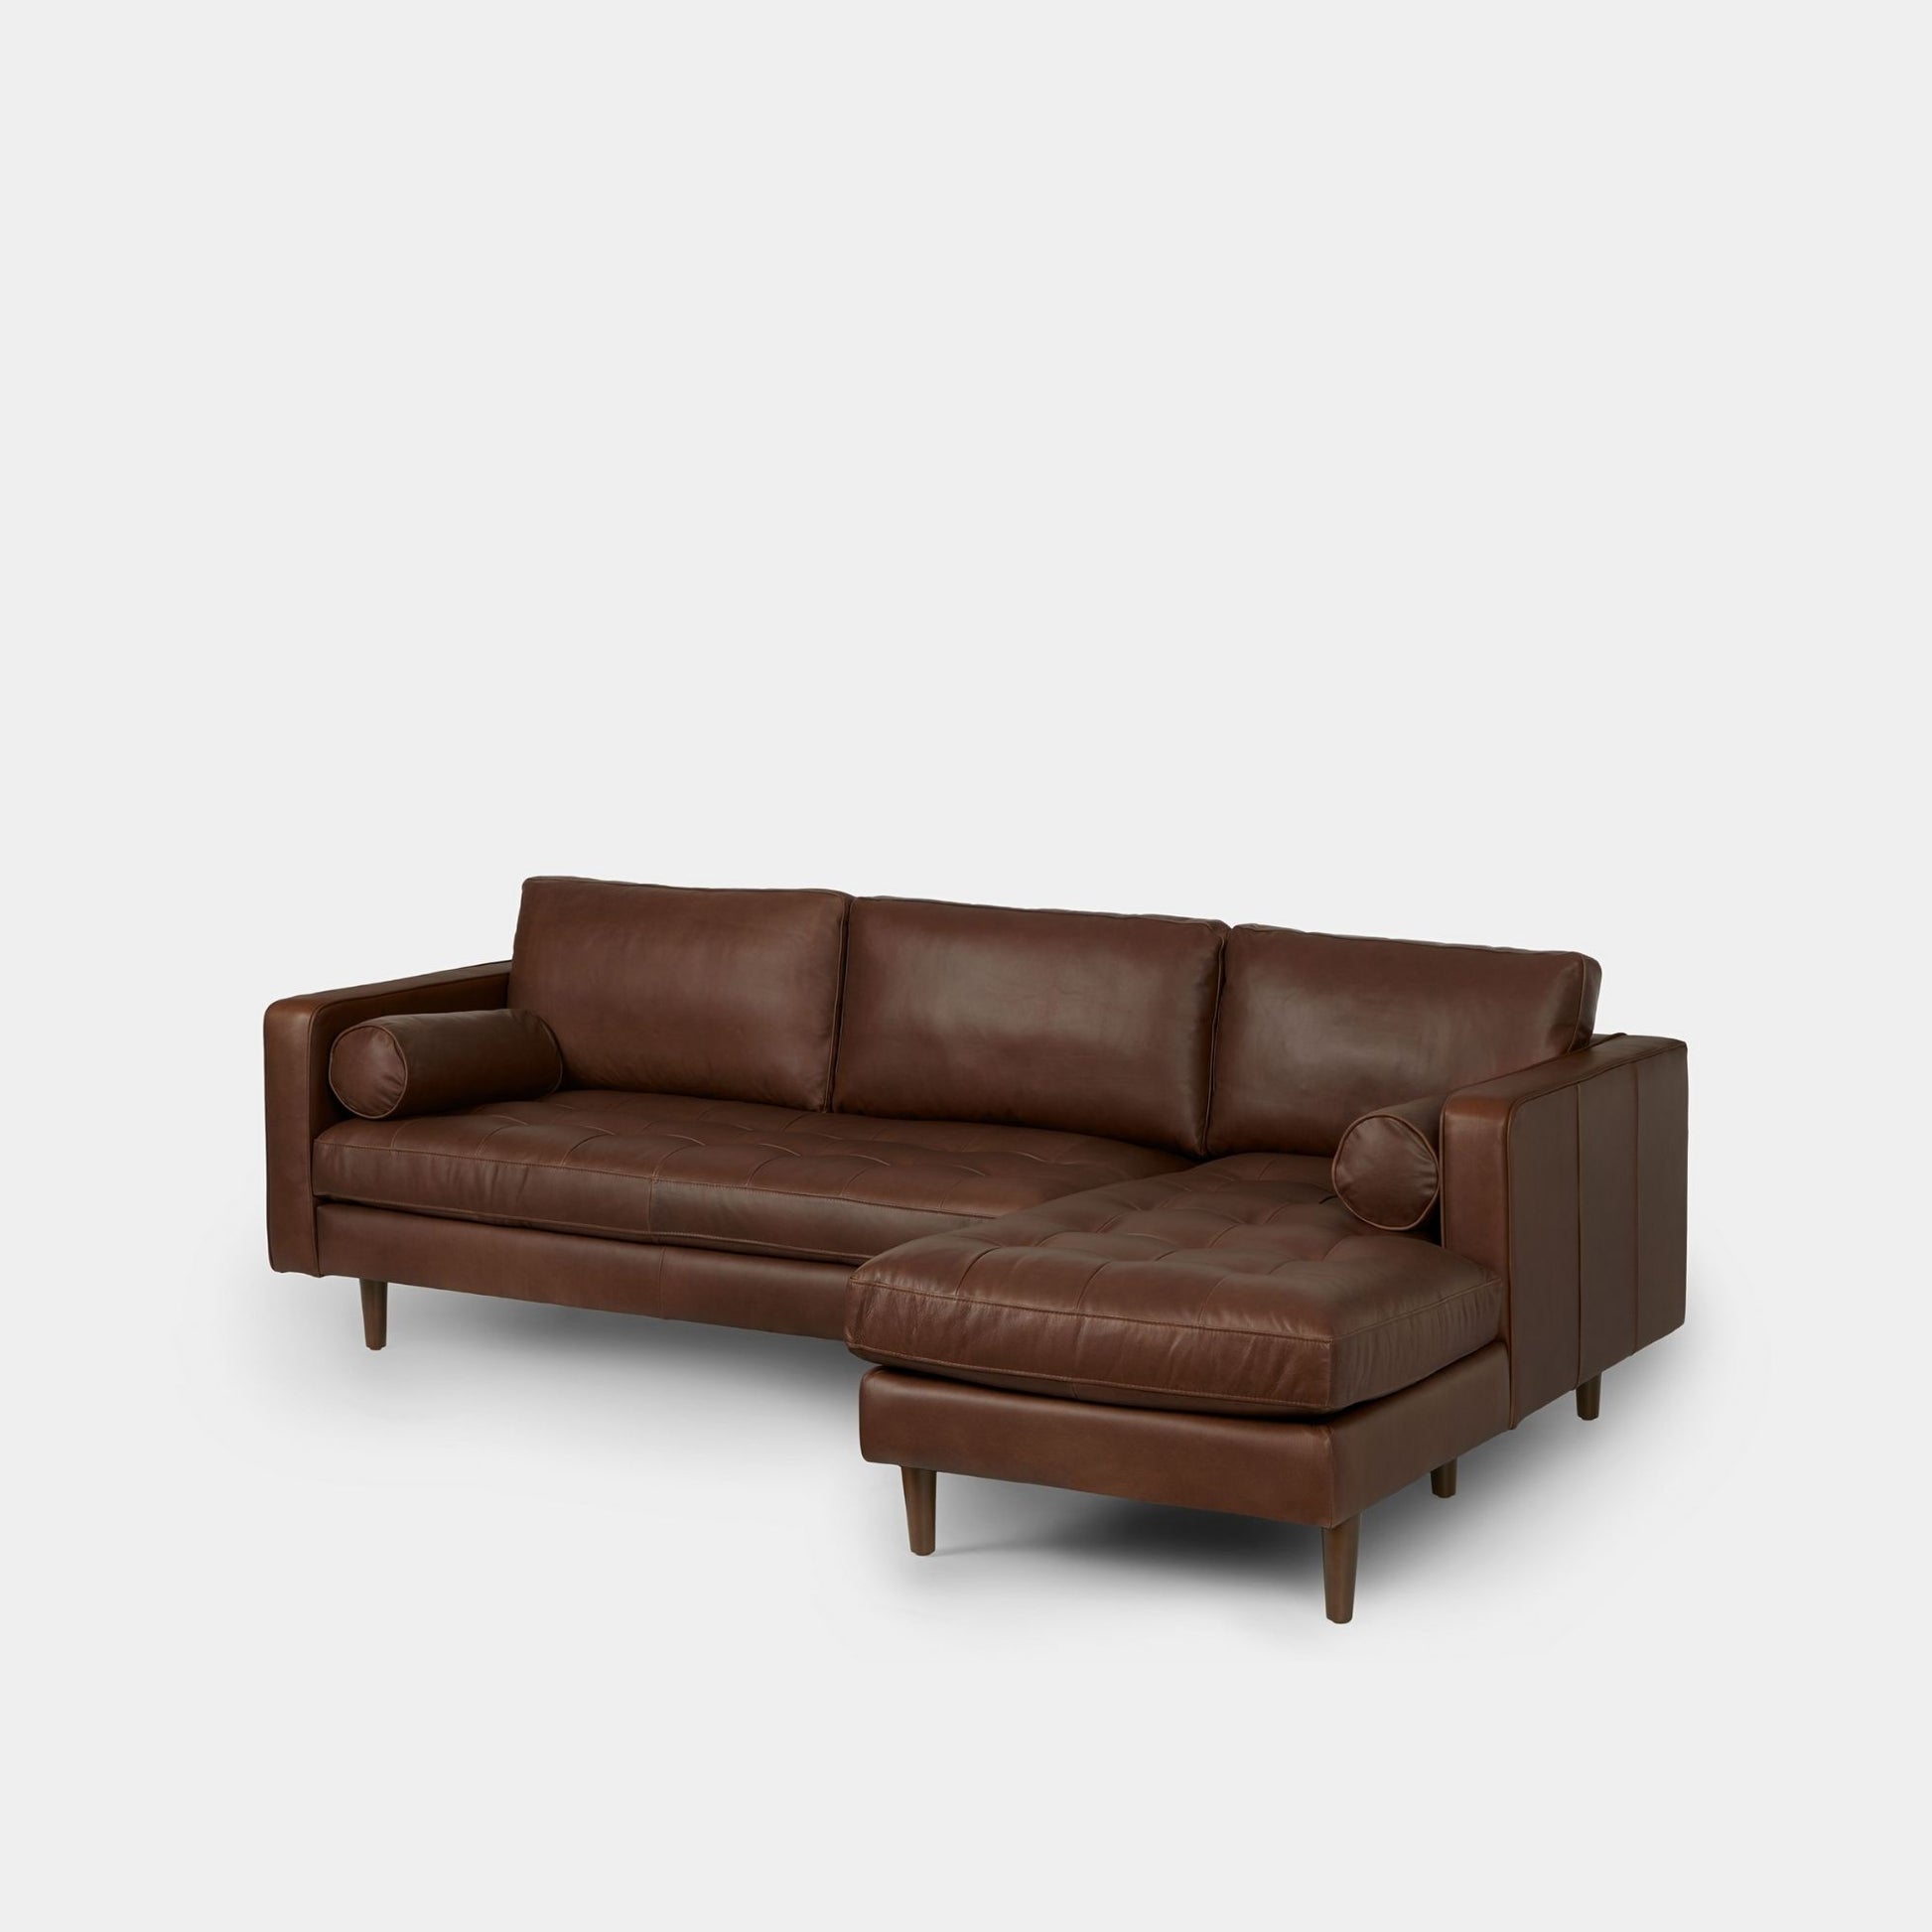 Castle leather sectional sofa right dark brown